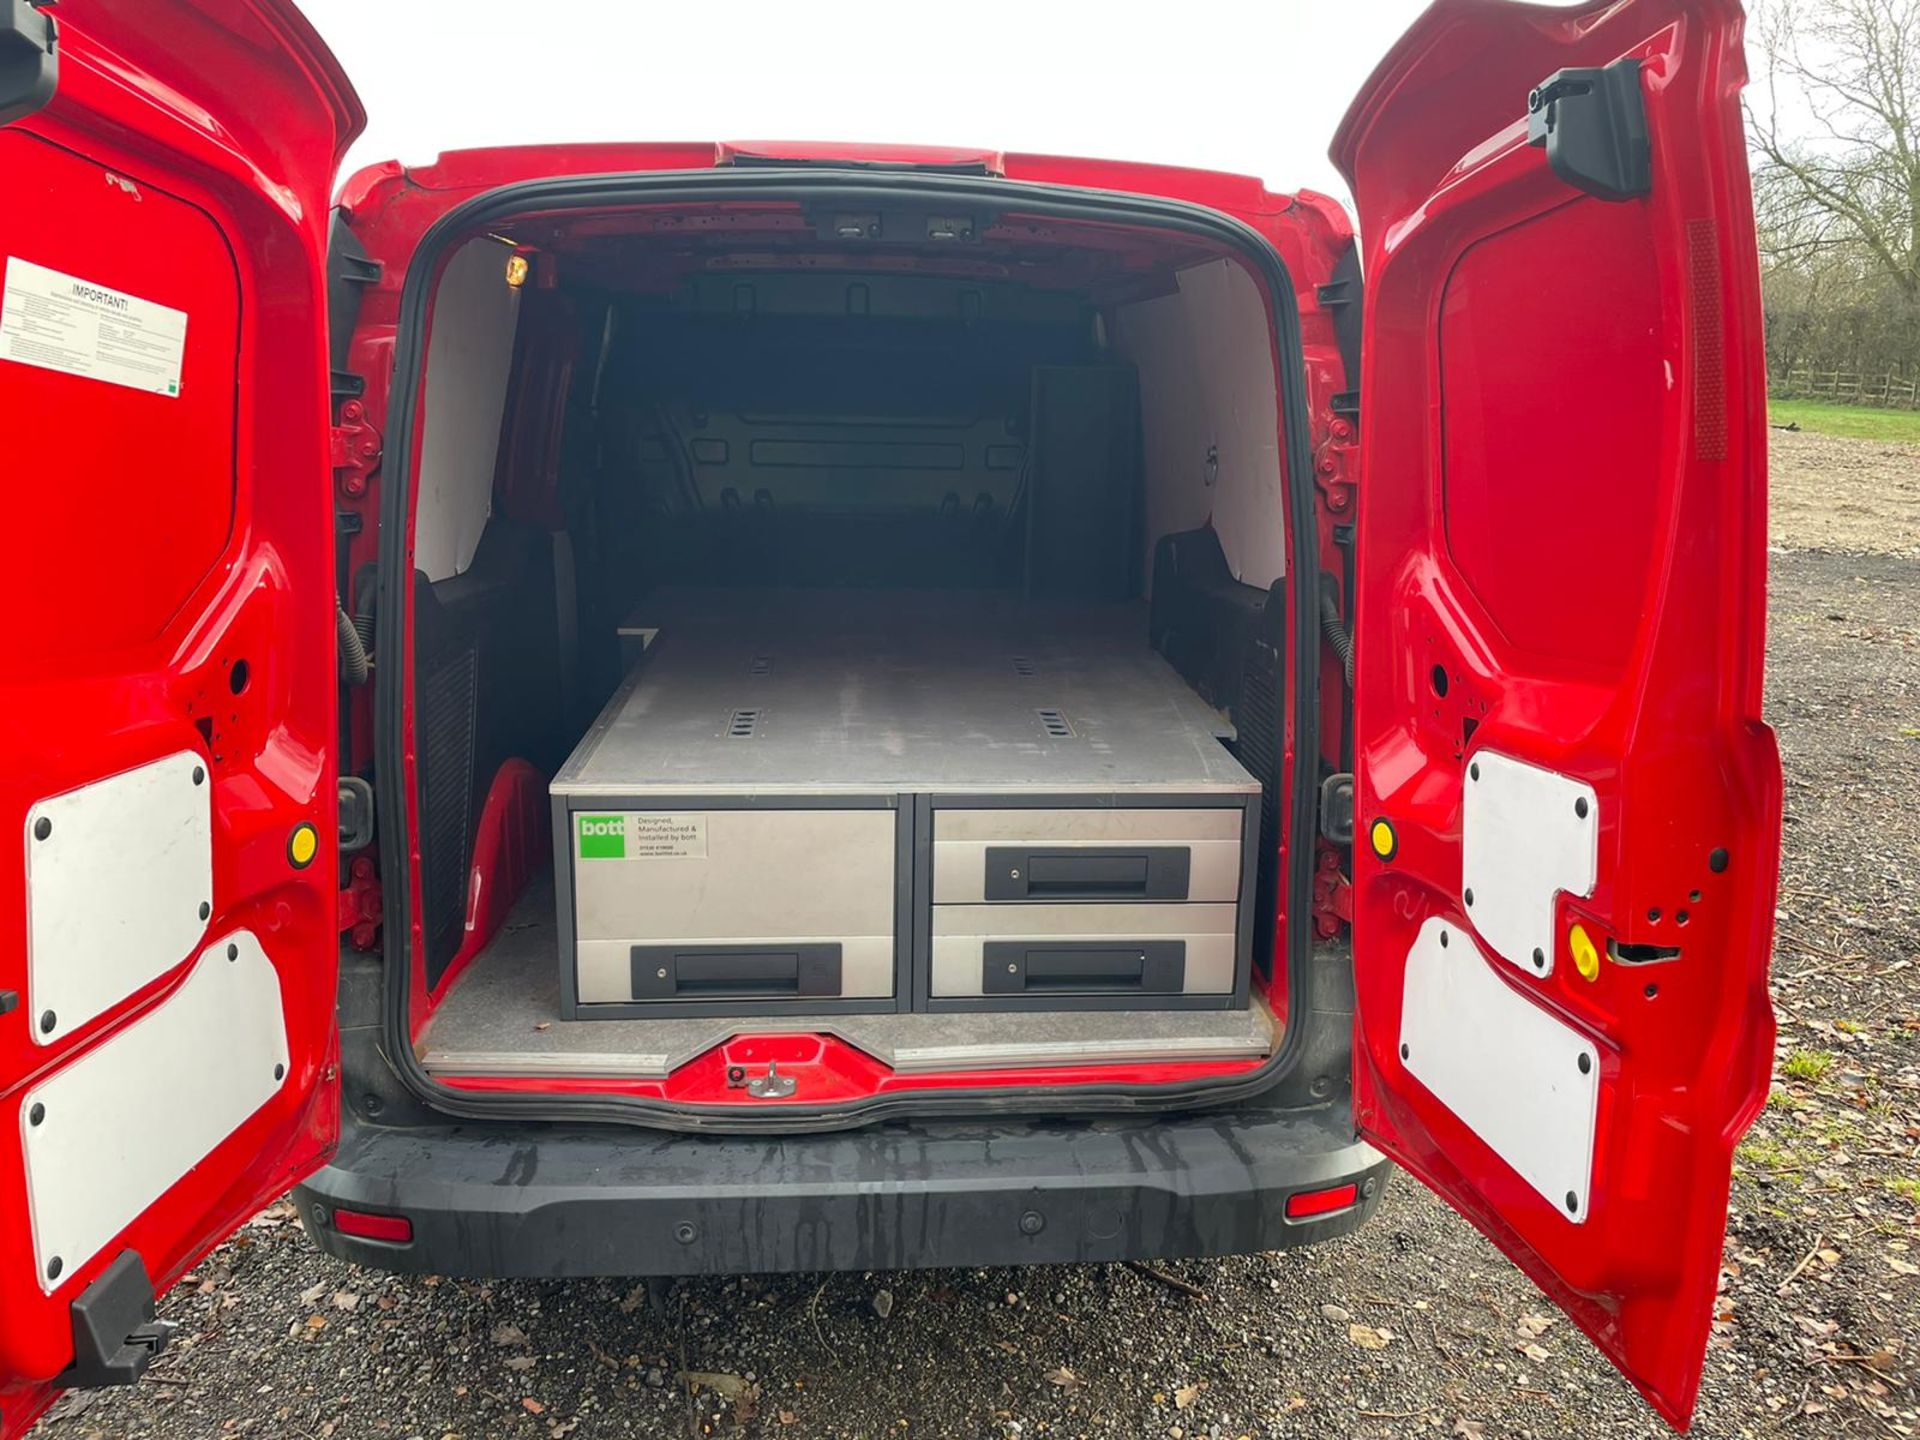 2014/64 REG FORD TRANSIT CONNECT 210 ECONETIC 1.6 DIESEL RED PANEL VAN, SHOWING 0 FORMER KEEPERS - Image 11 of 14